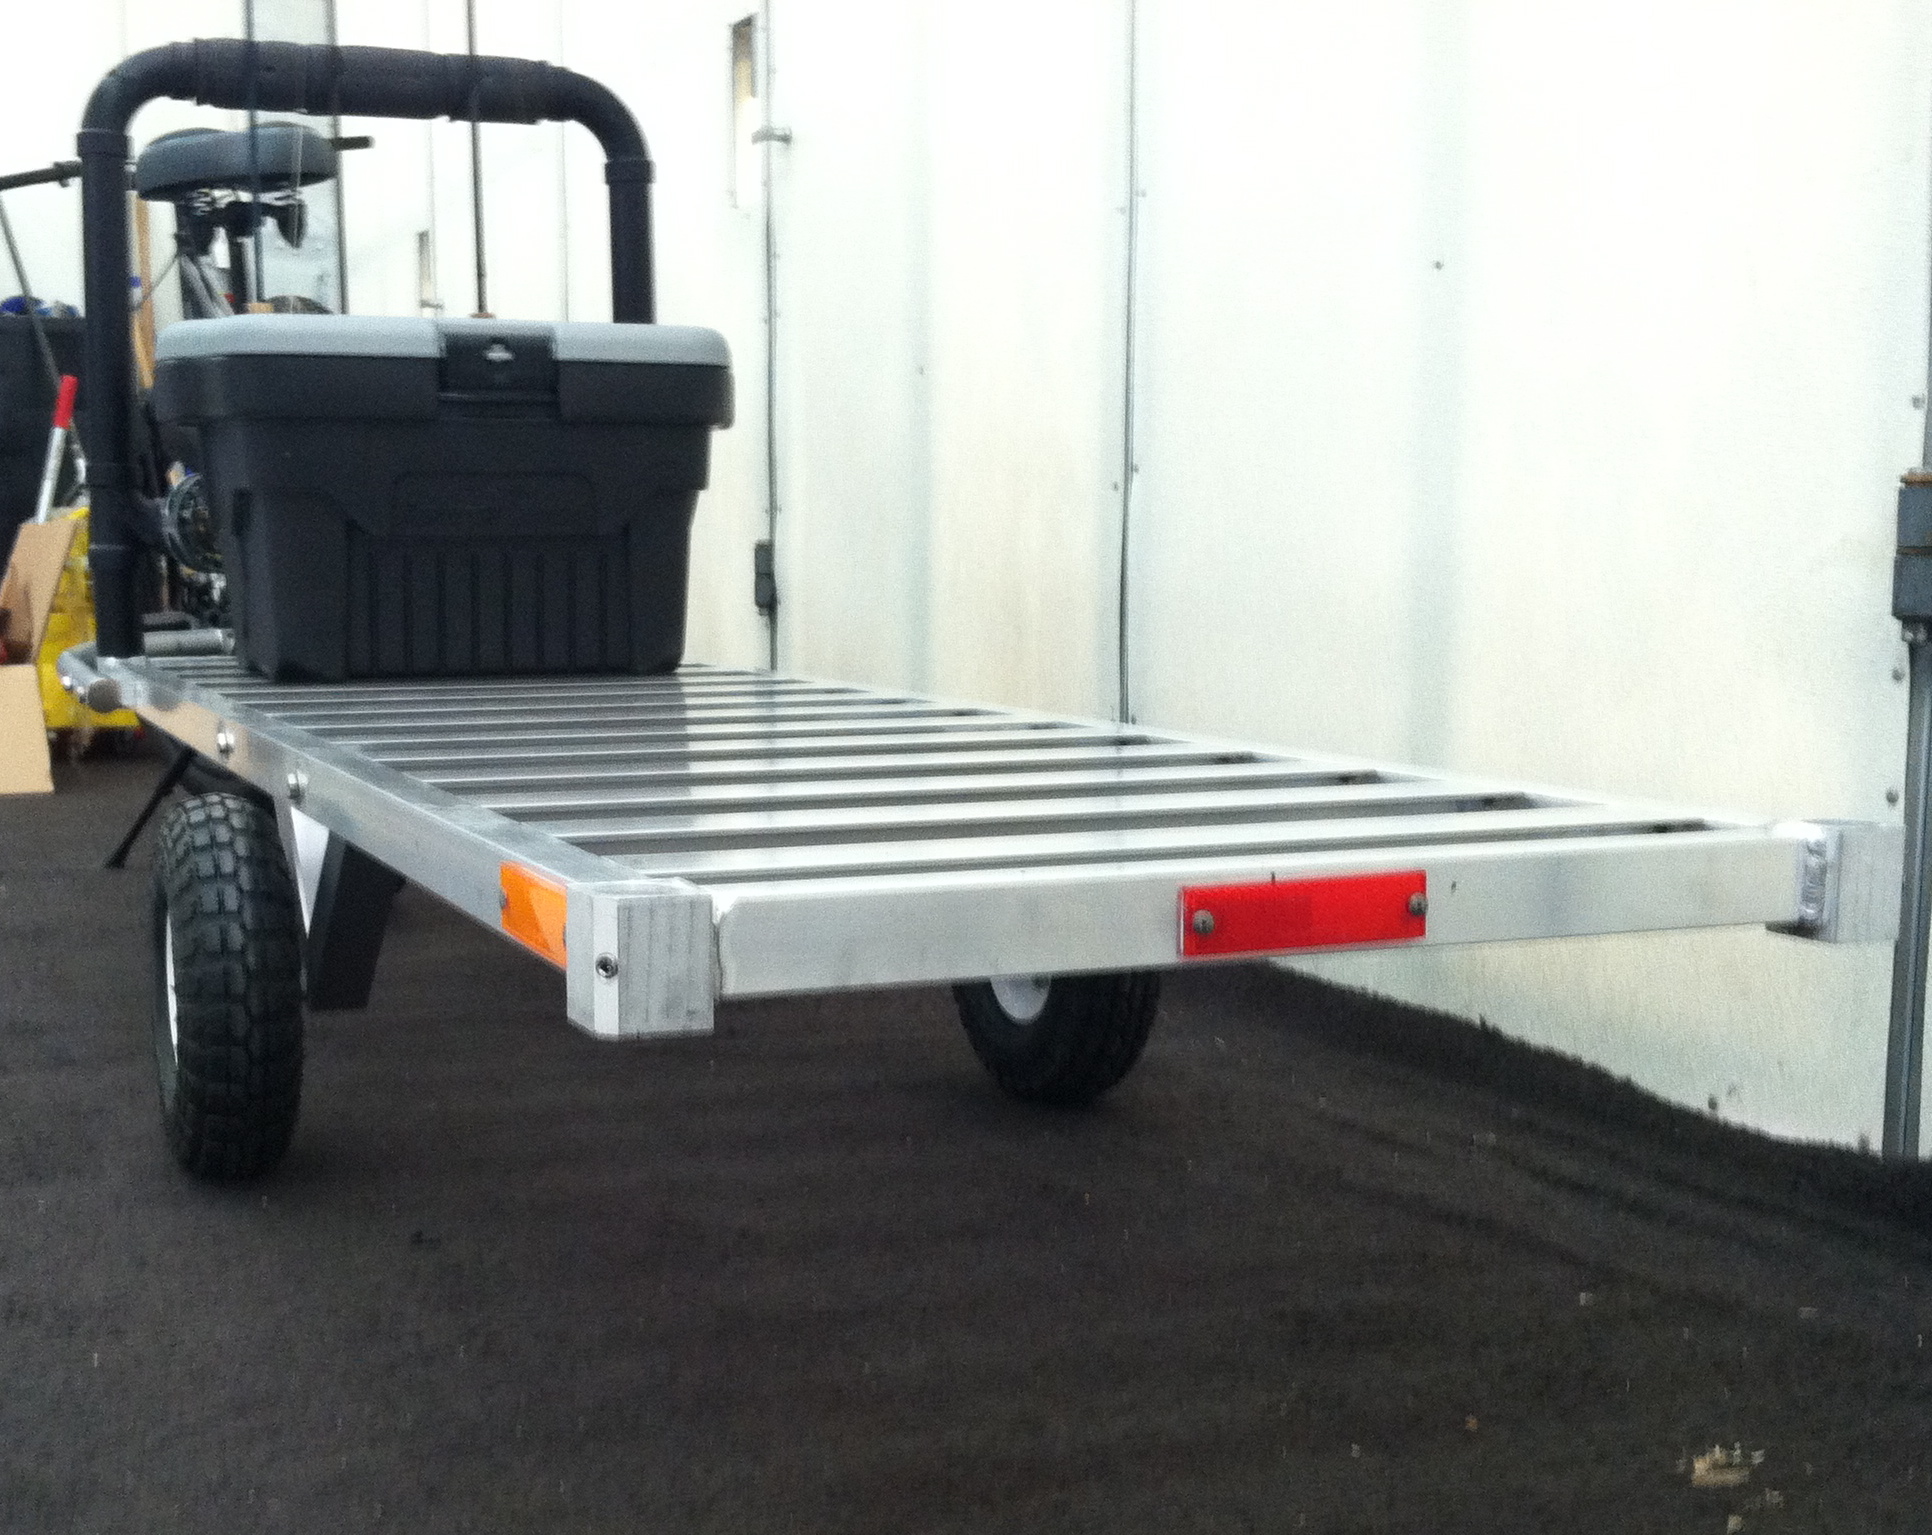 Bicycle Cargo Trailers